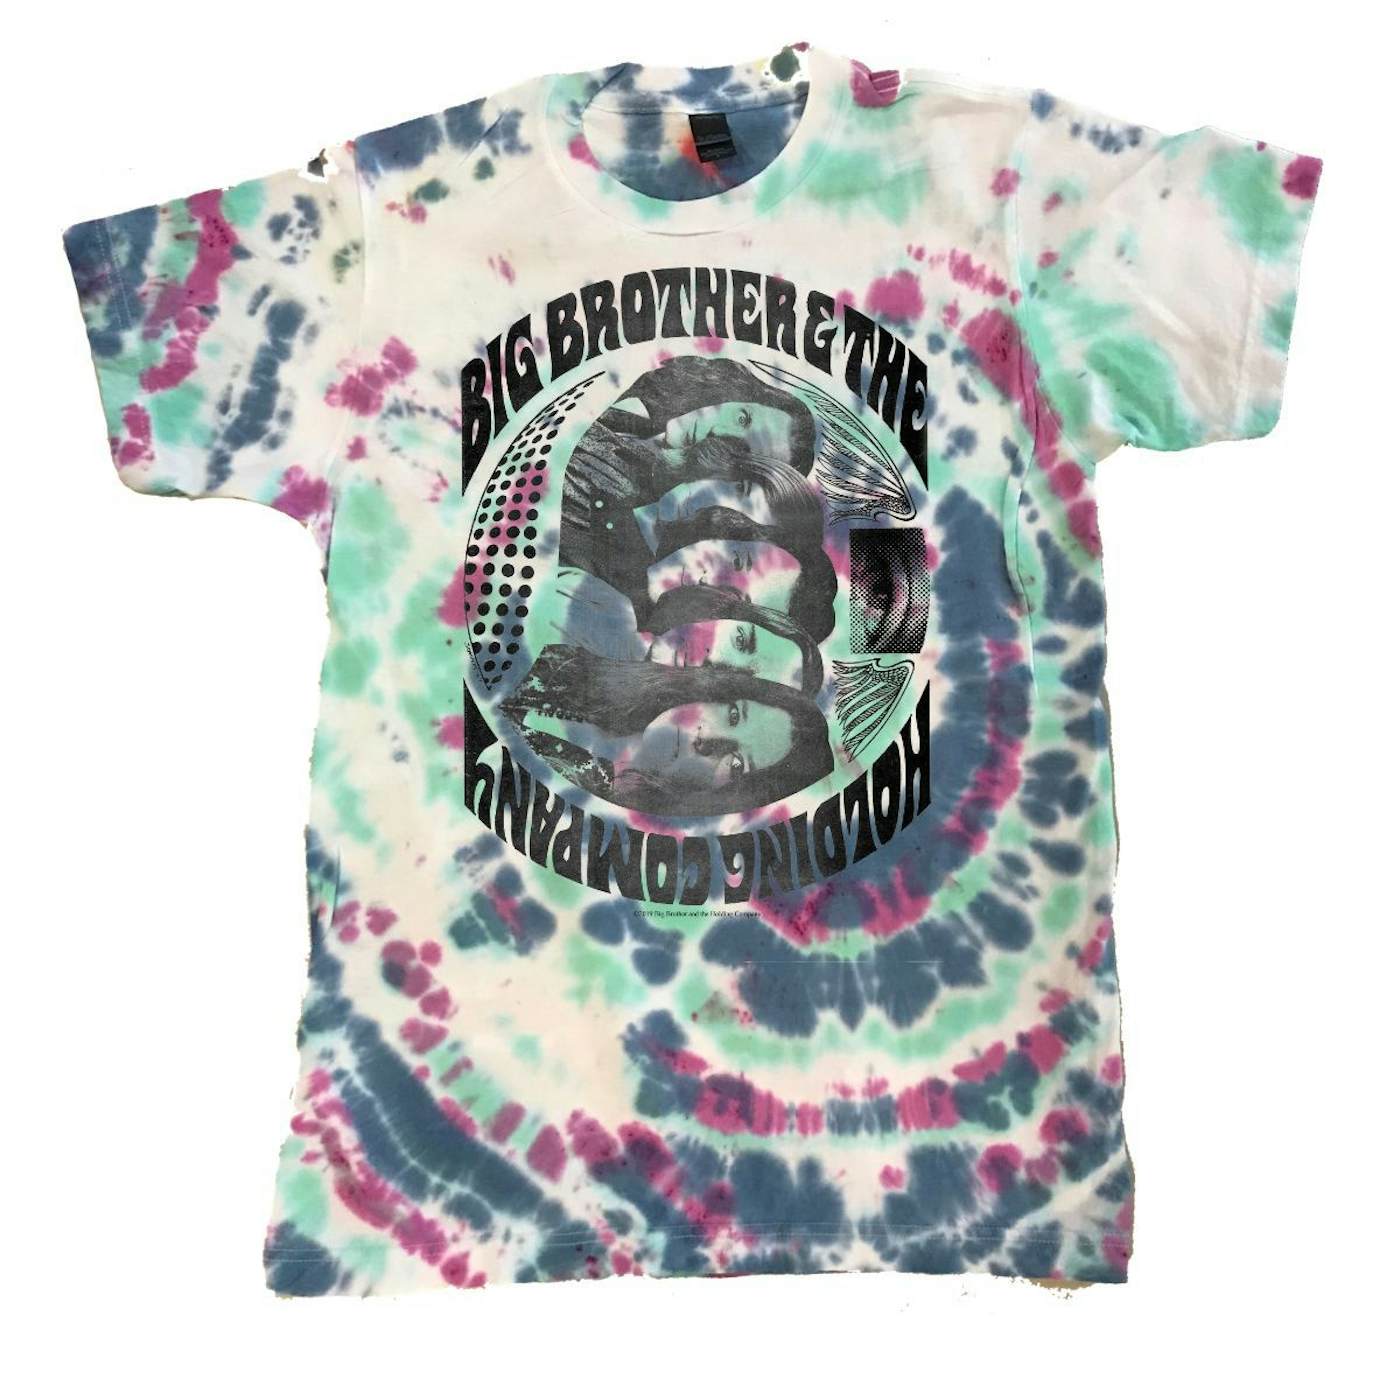 Big Brother & The Holding Company Tie-Dye Band T-Shirt